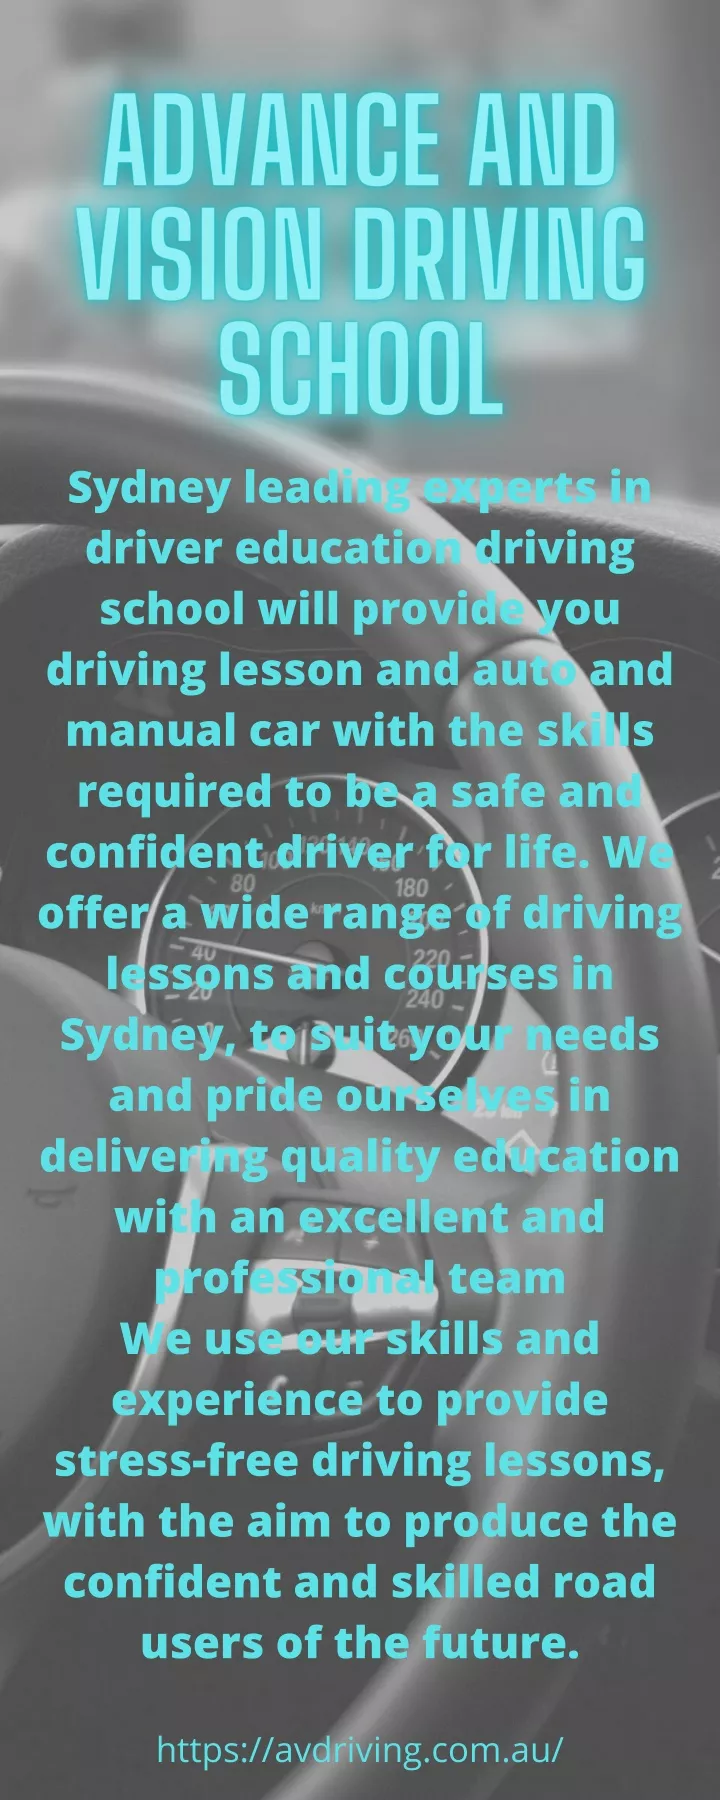 sydney leading experts in driver education